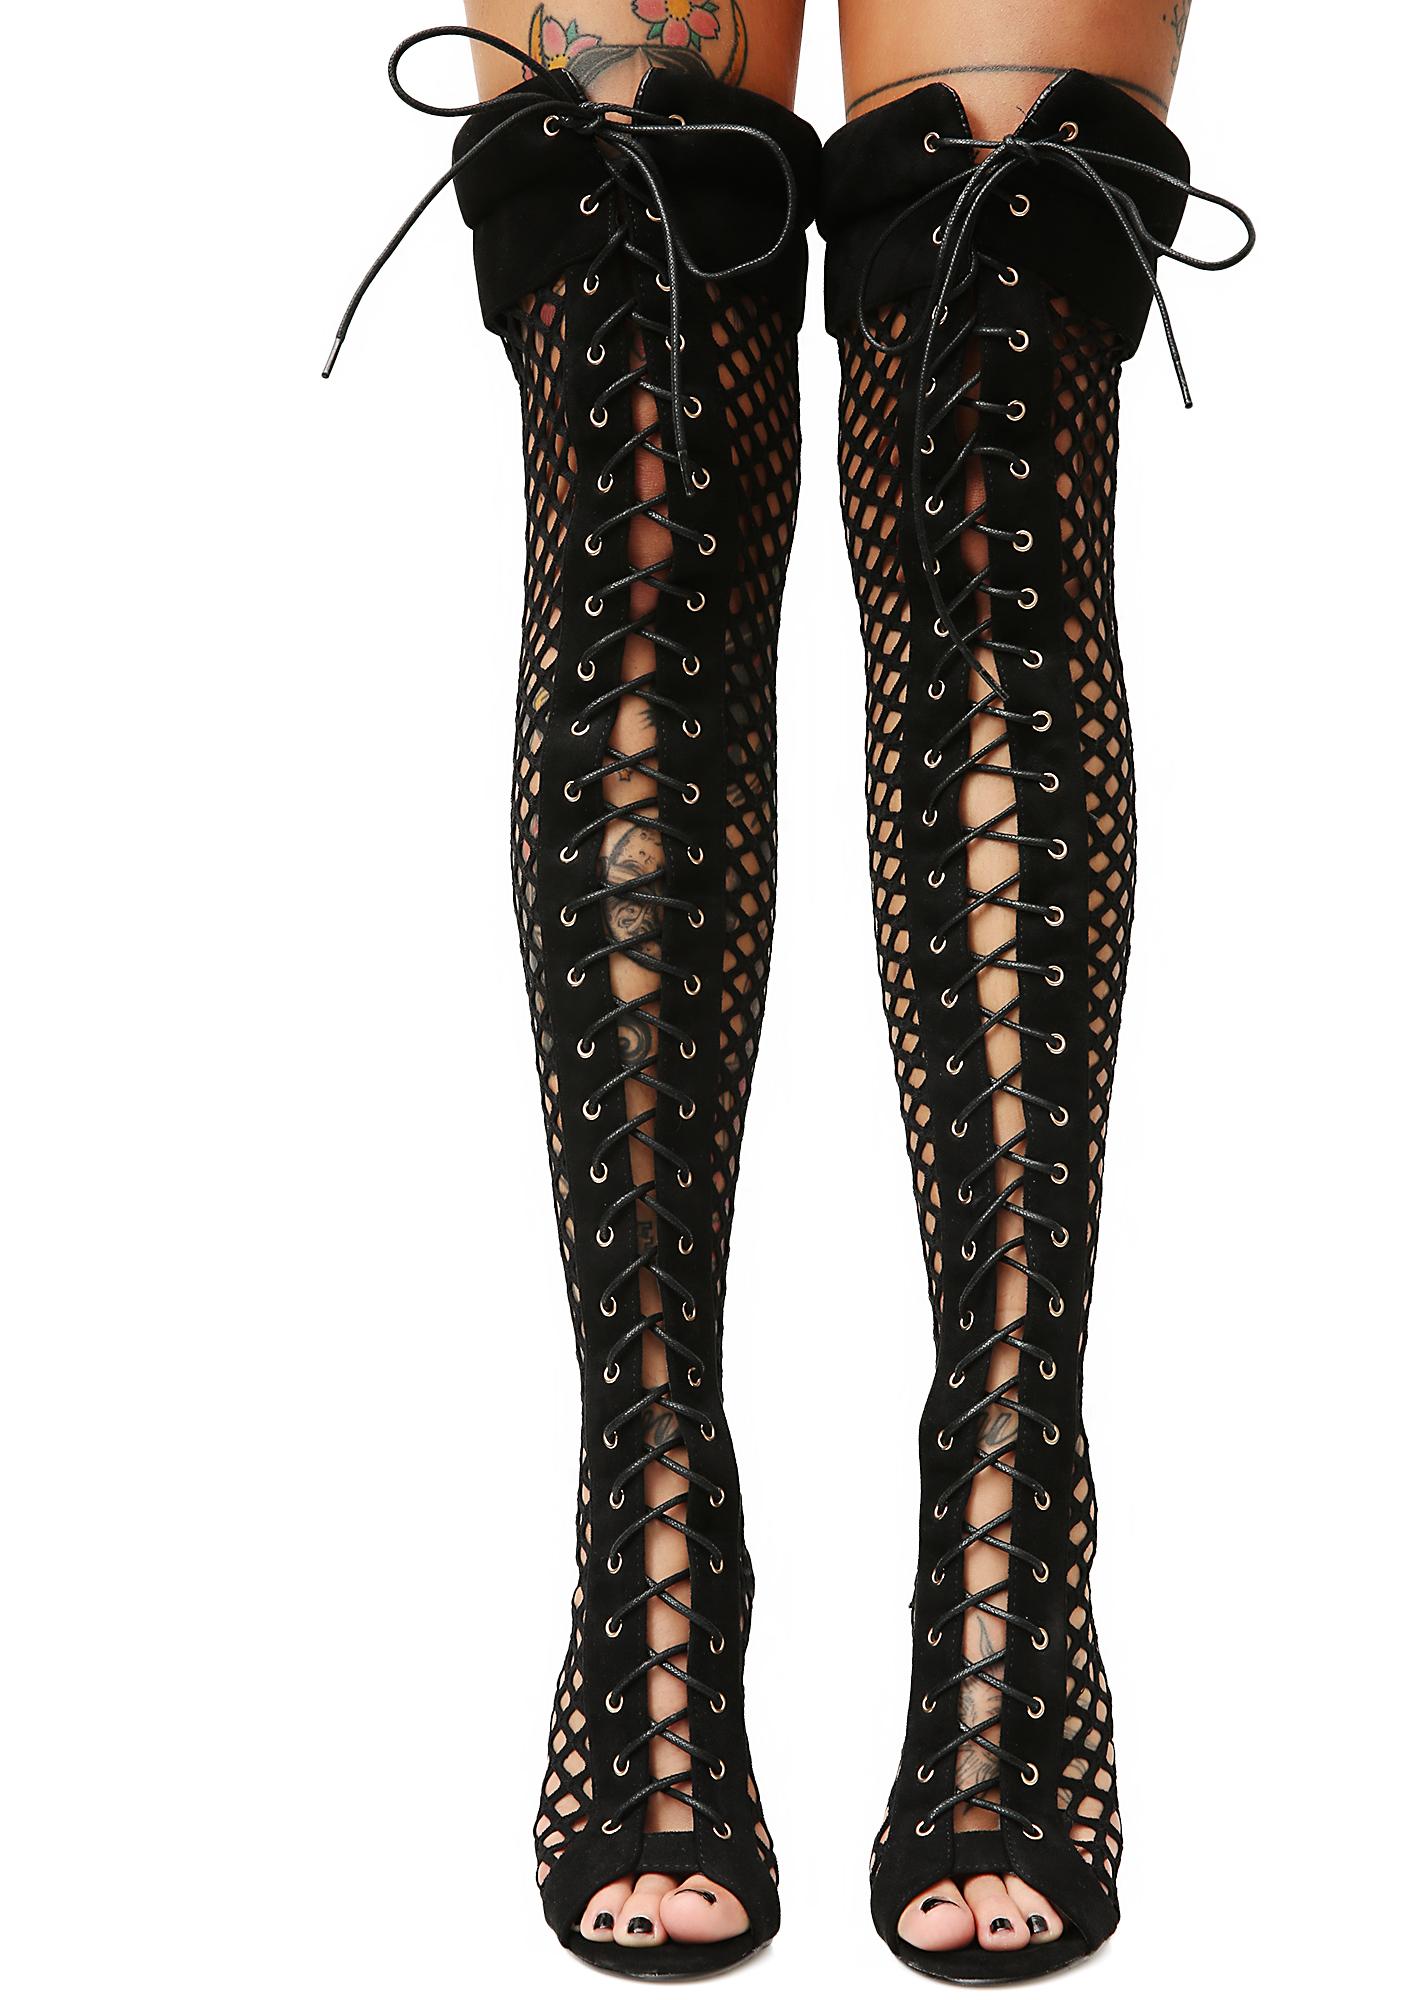 thigh high boots and fishnet